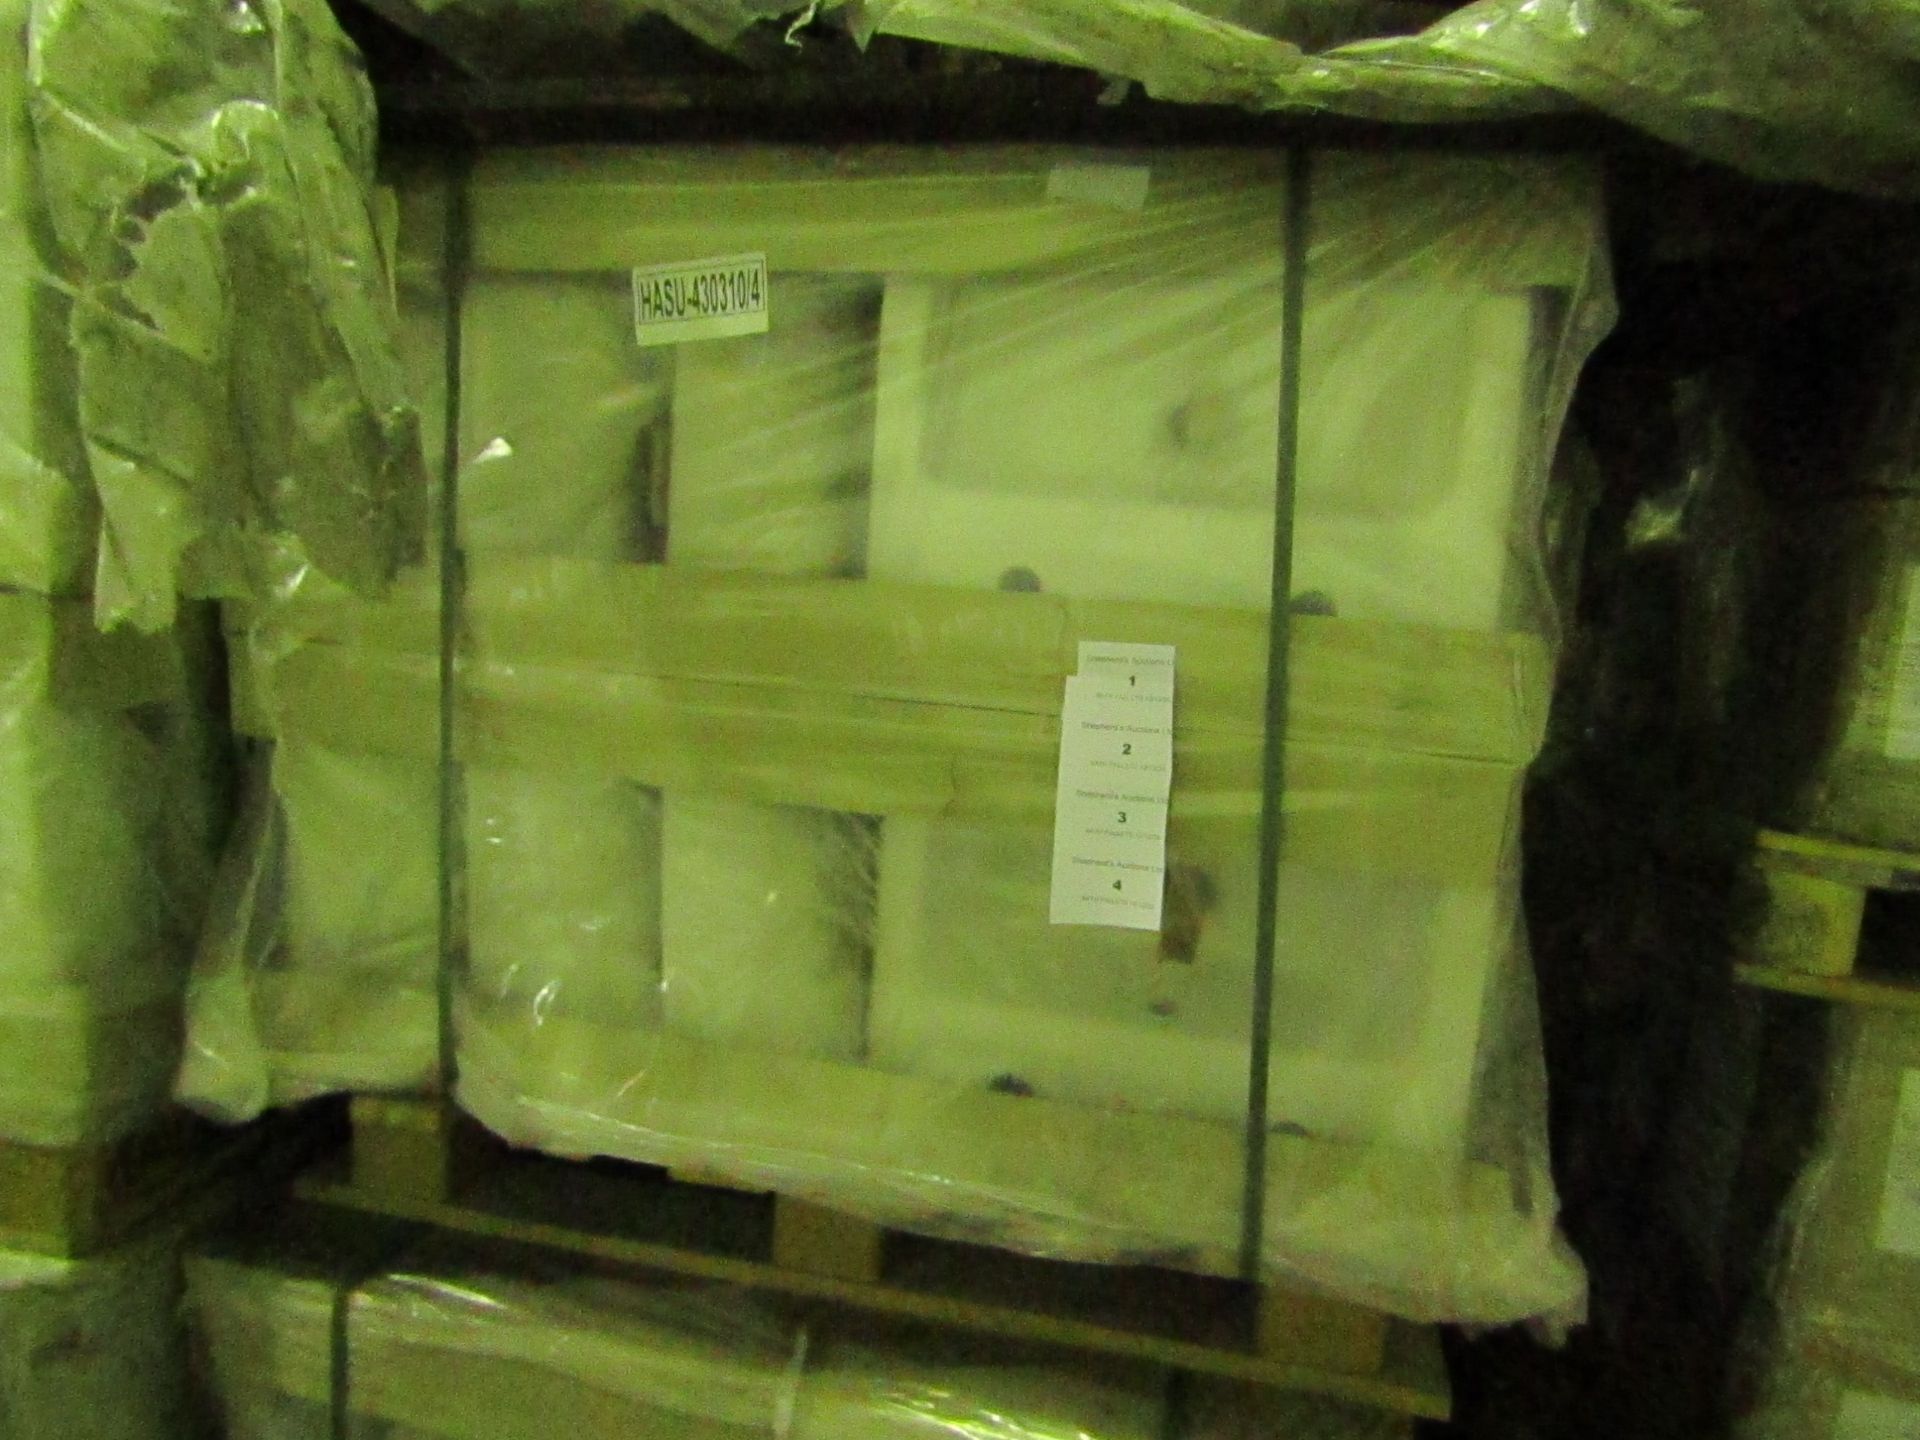 Pallet of approx 28x Lecico Senner 430mm basins, new.